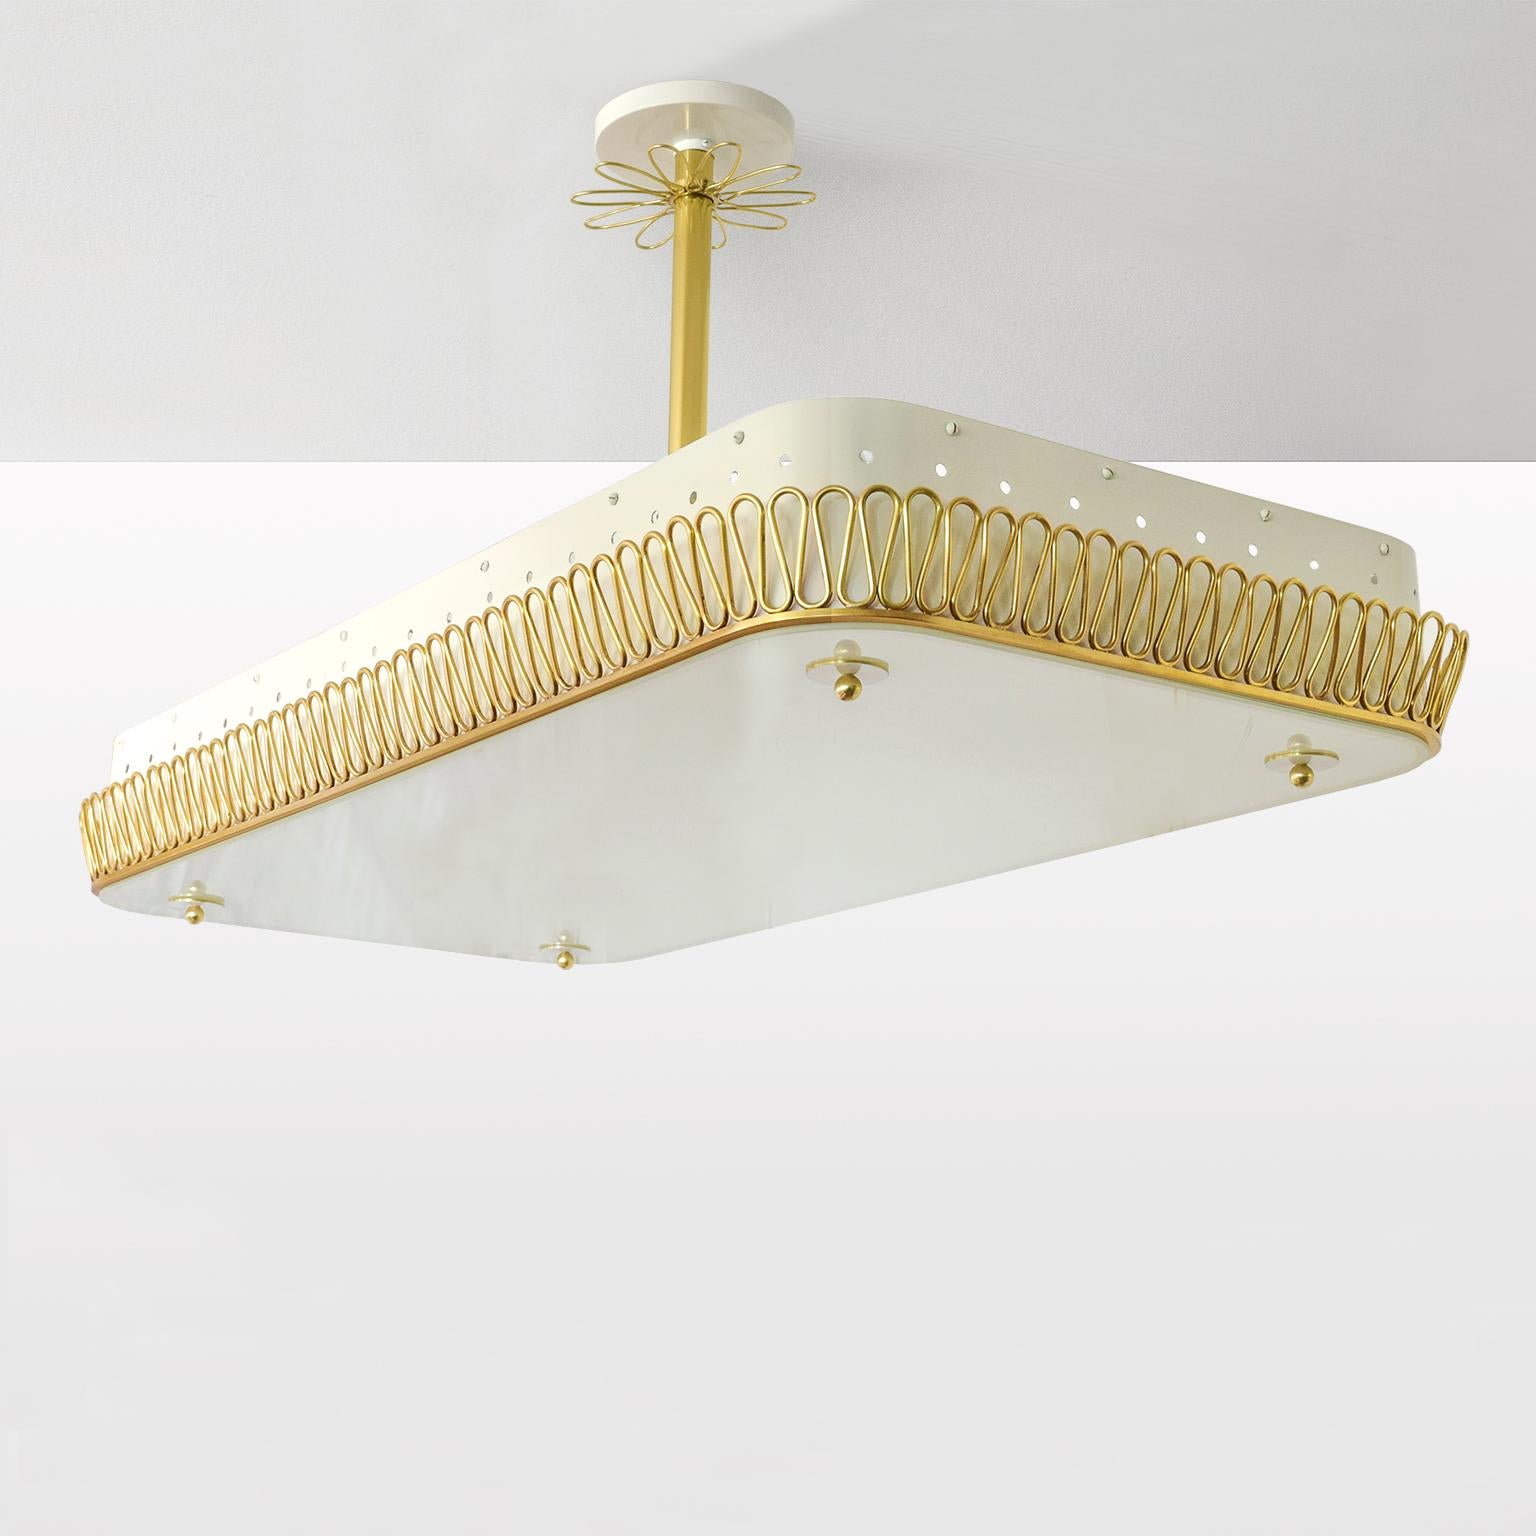 A large rounded corner rectangular Scandinavian Modern pendant with a lacquered cream white body which has a polished brass filigree design along its bottom edge. A large opaline glass panel is attached by brass hardware. Polished brass stem and